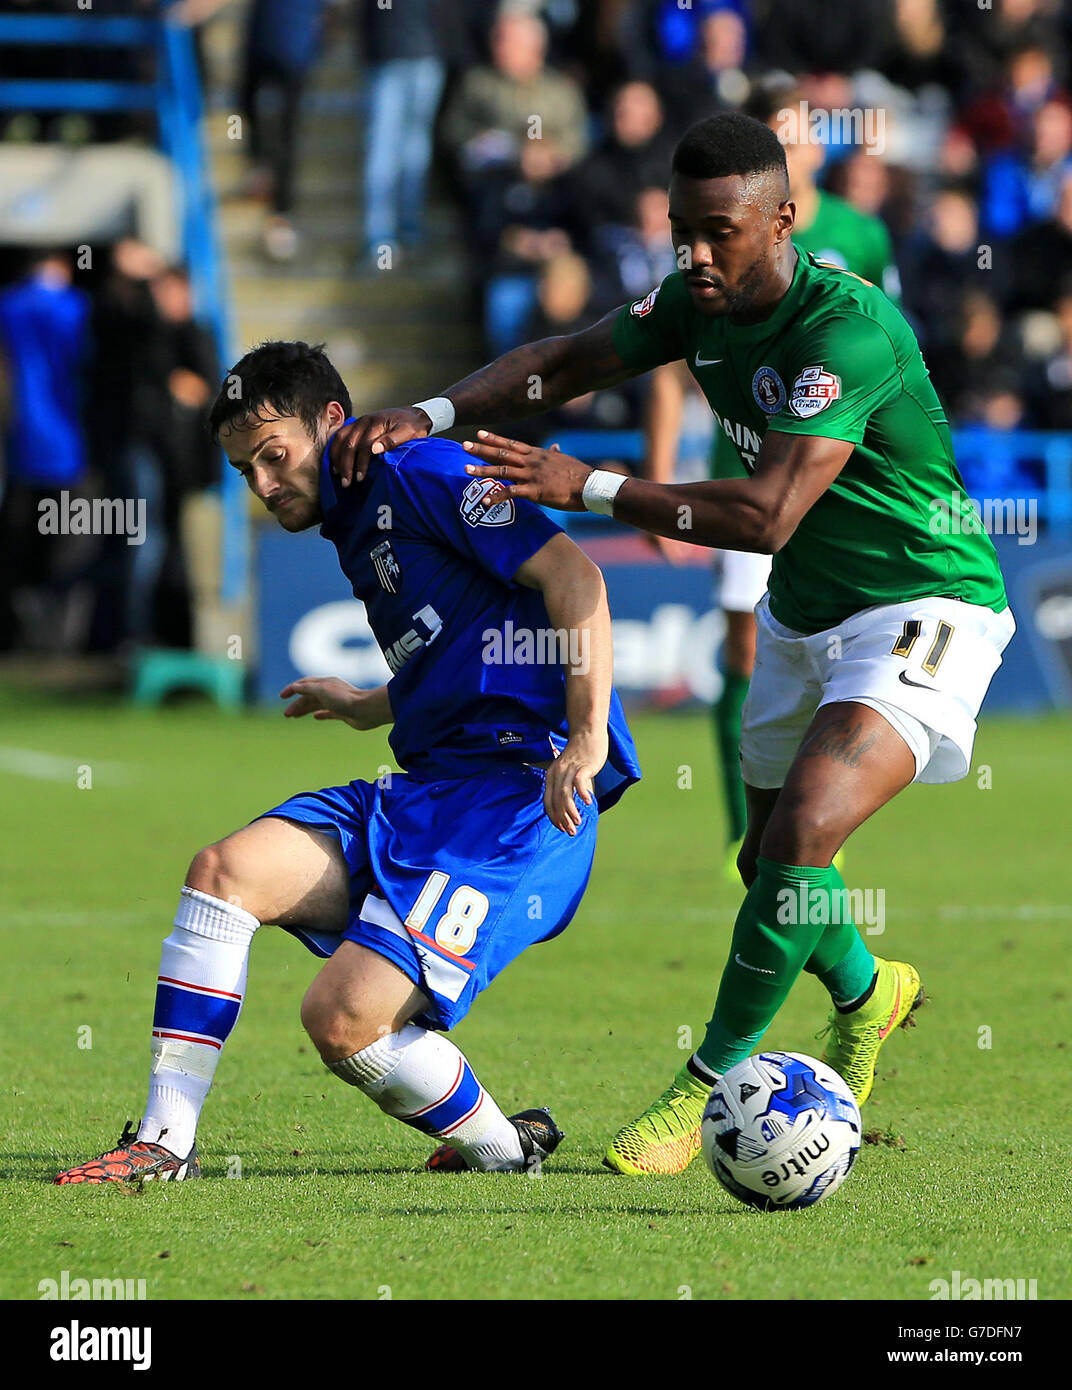 Gillingham's Josh Pritchard (left) is challenged by Scunthorpe United's Jennison Myrie-Williams during the Sky Bet League One match at the Priestfield Stadium, Gillingham. Stock Photo